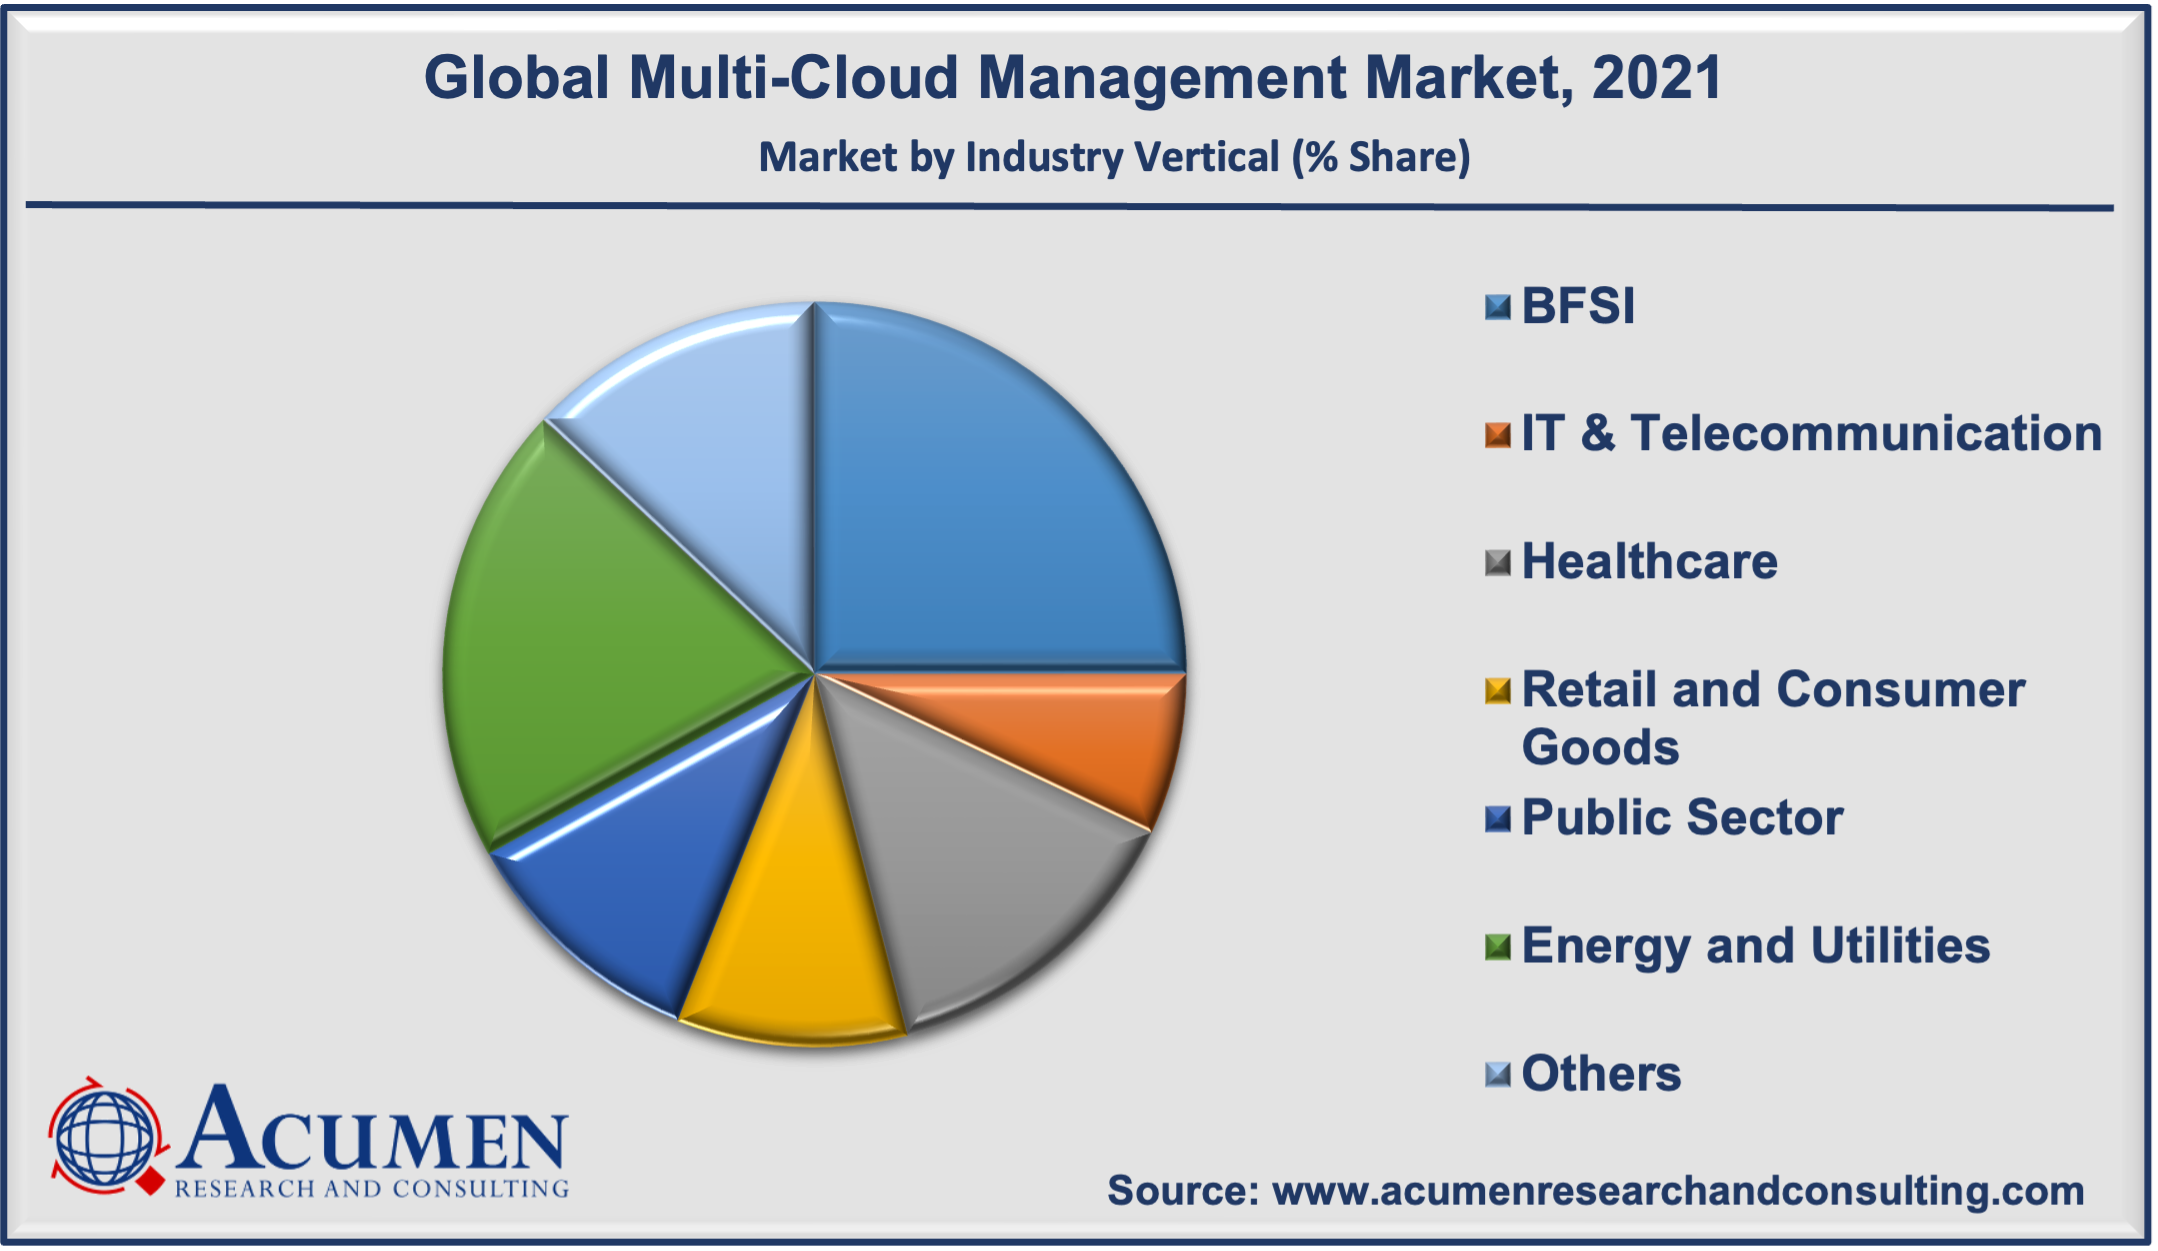 Multi-Cloud Management Market Analysis was accounted for USD 4,585 Million in 2021 and is estimated to reach the market value of USD 49,894 Million by 2030.